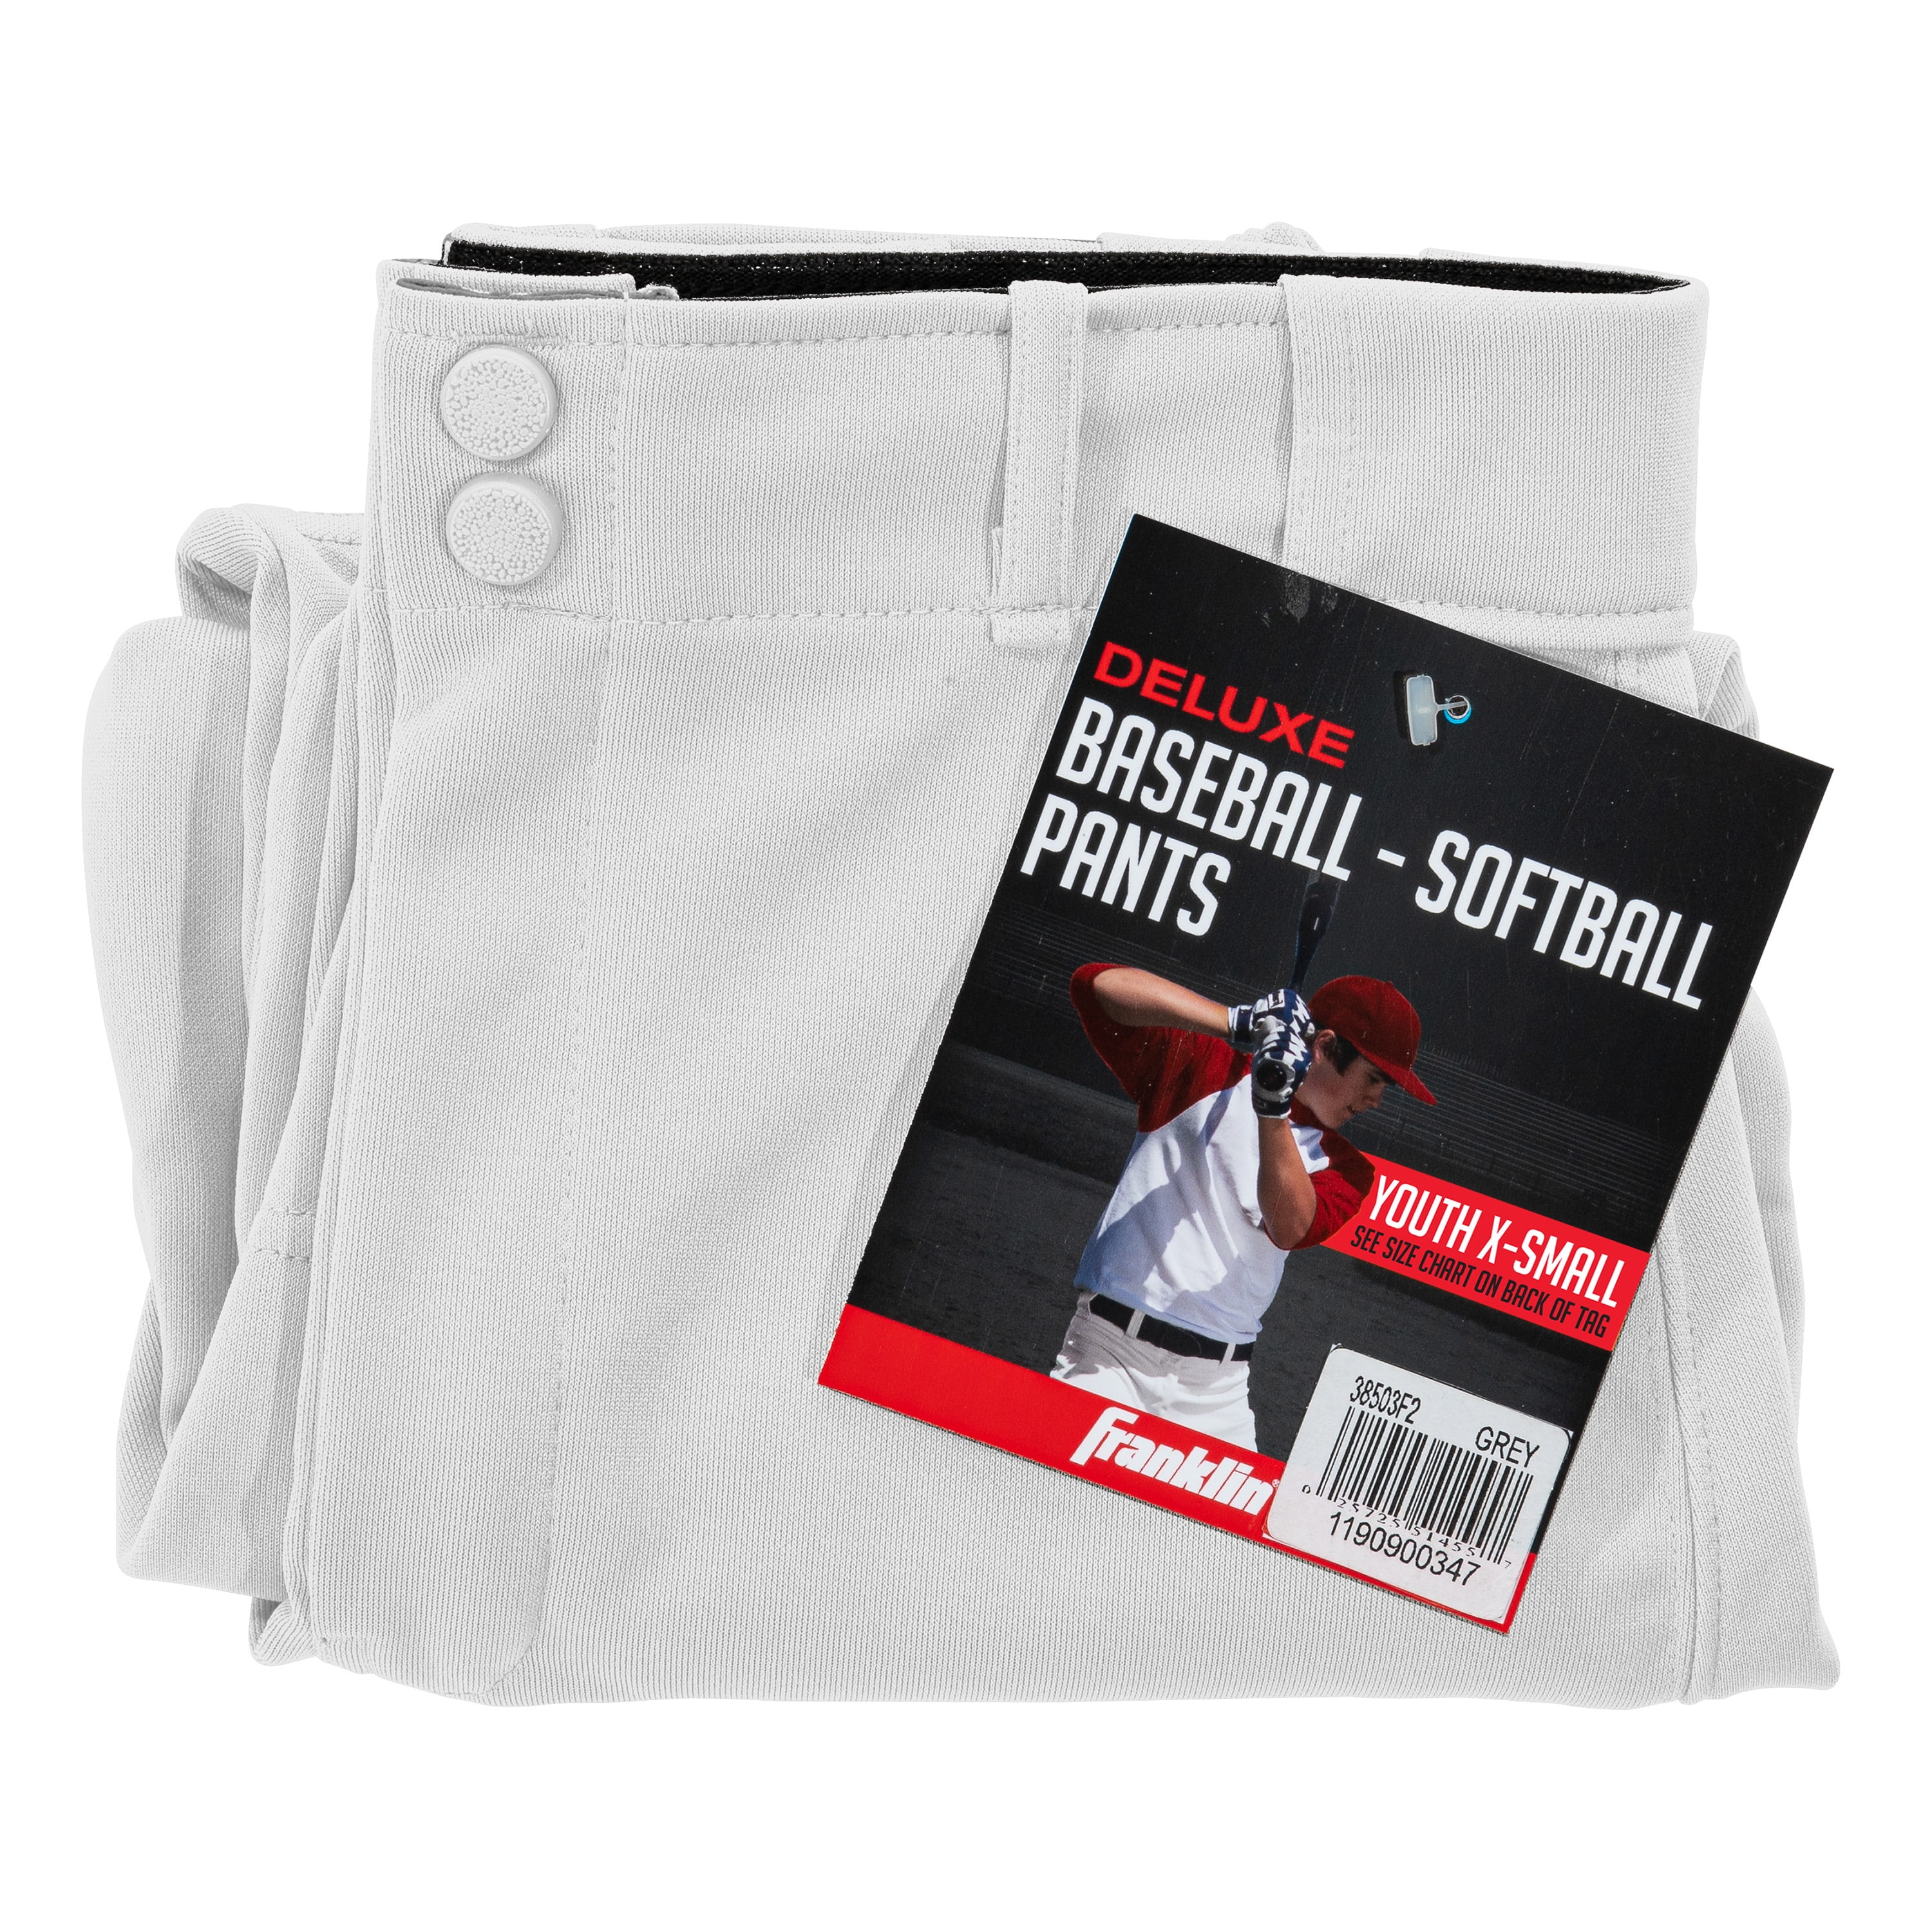 under armour youth relaxed fit baseball pants